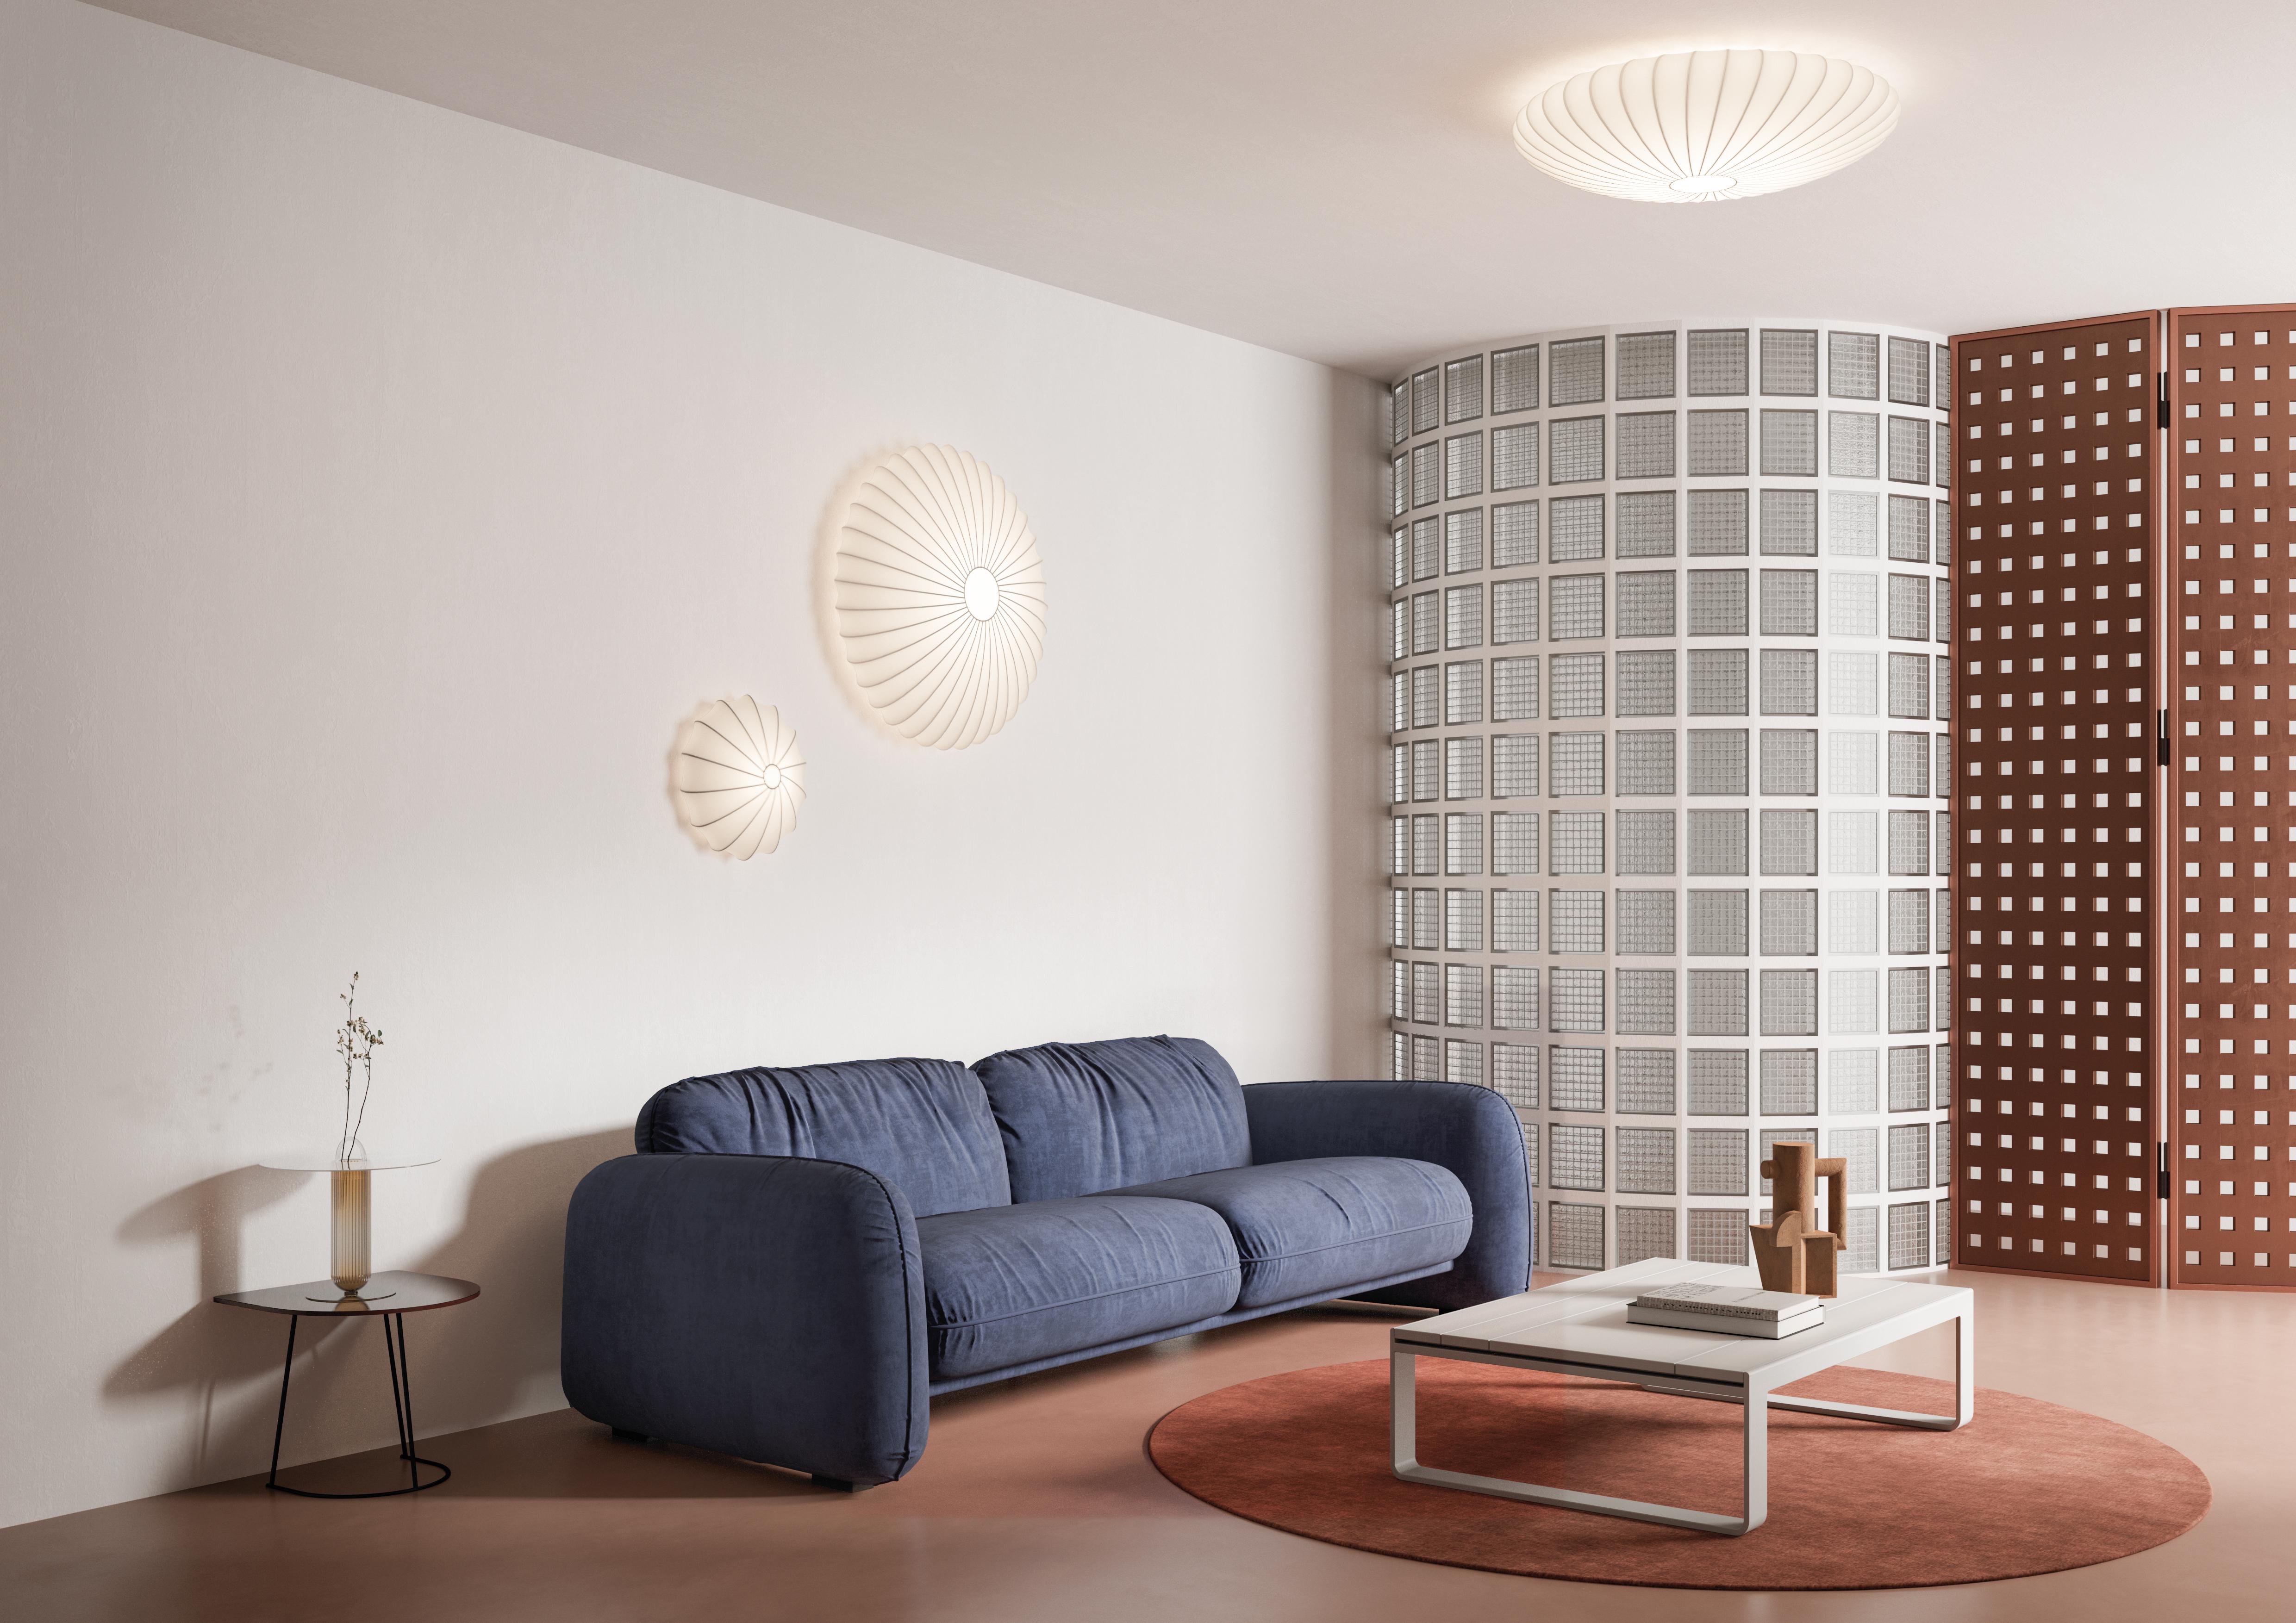 Axolight Muse Large Ceiling Light in Multicolor with White Metal Finish by Sandro Santantonio

Cheerfulness meets inspiration and together they create Muse. Energetic colours, sinuous lines, fluid fabric come together, leaving the imagination